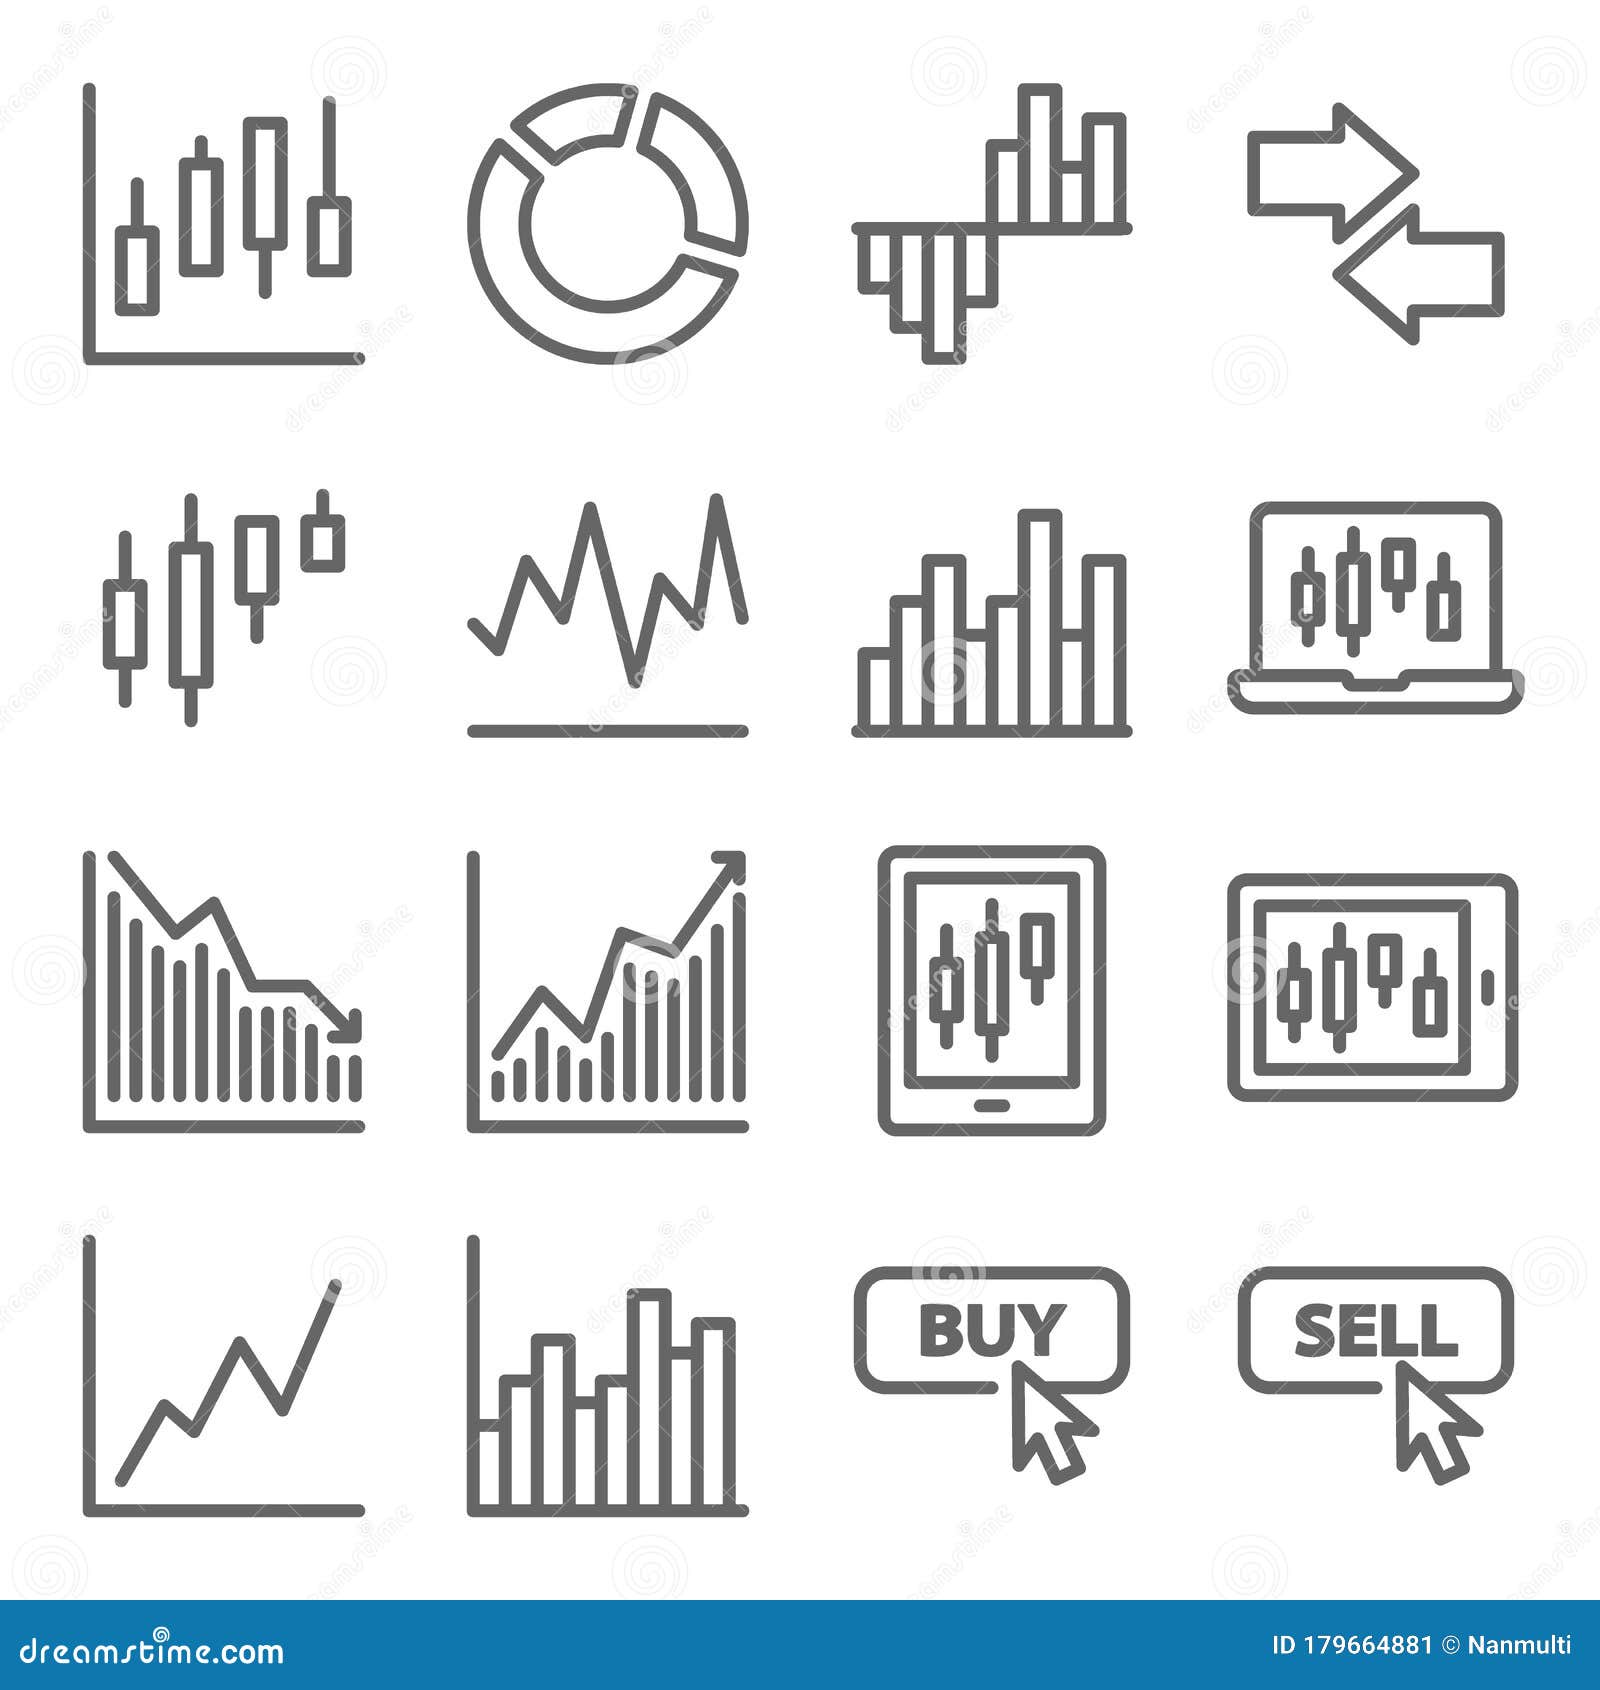 stock trading icon set  . contains such icon as online trading, buy, sell, portfolio, candle, pie chart and more